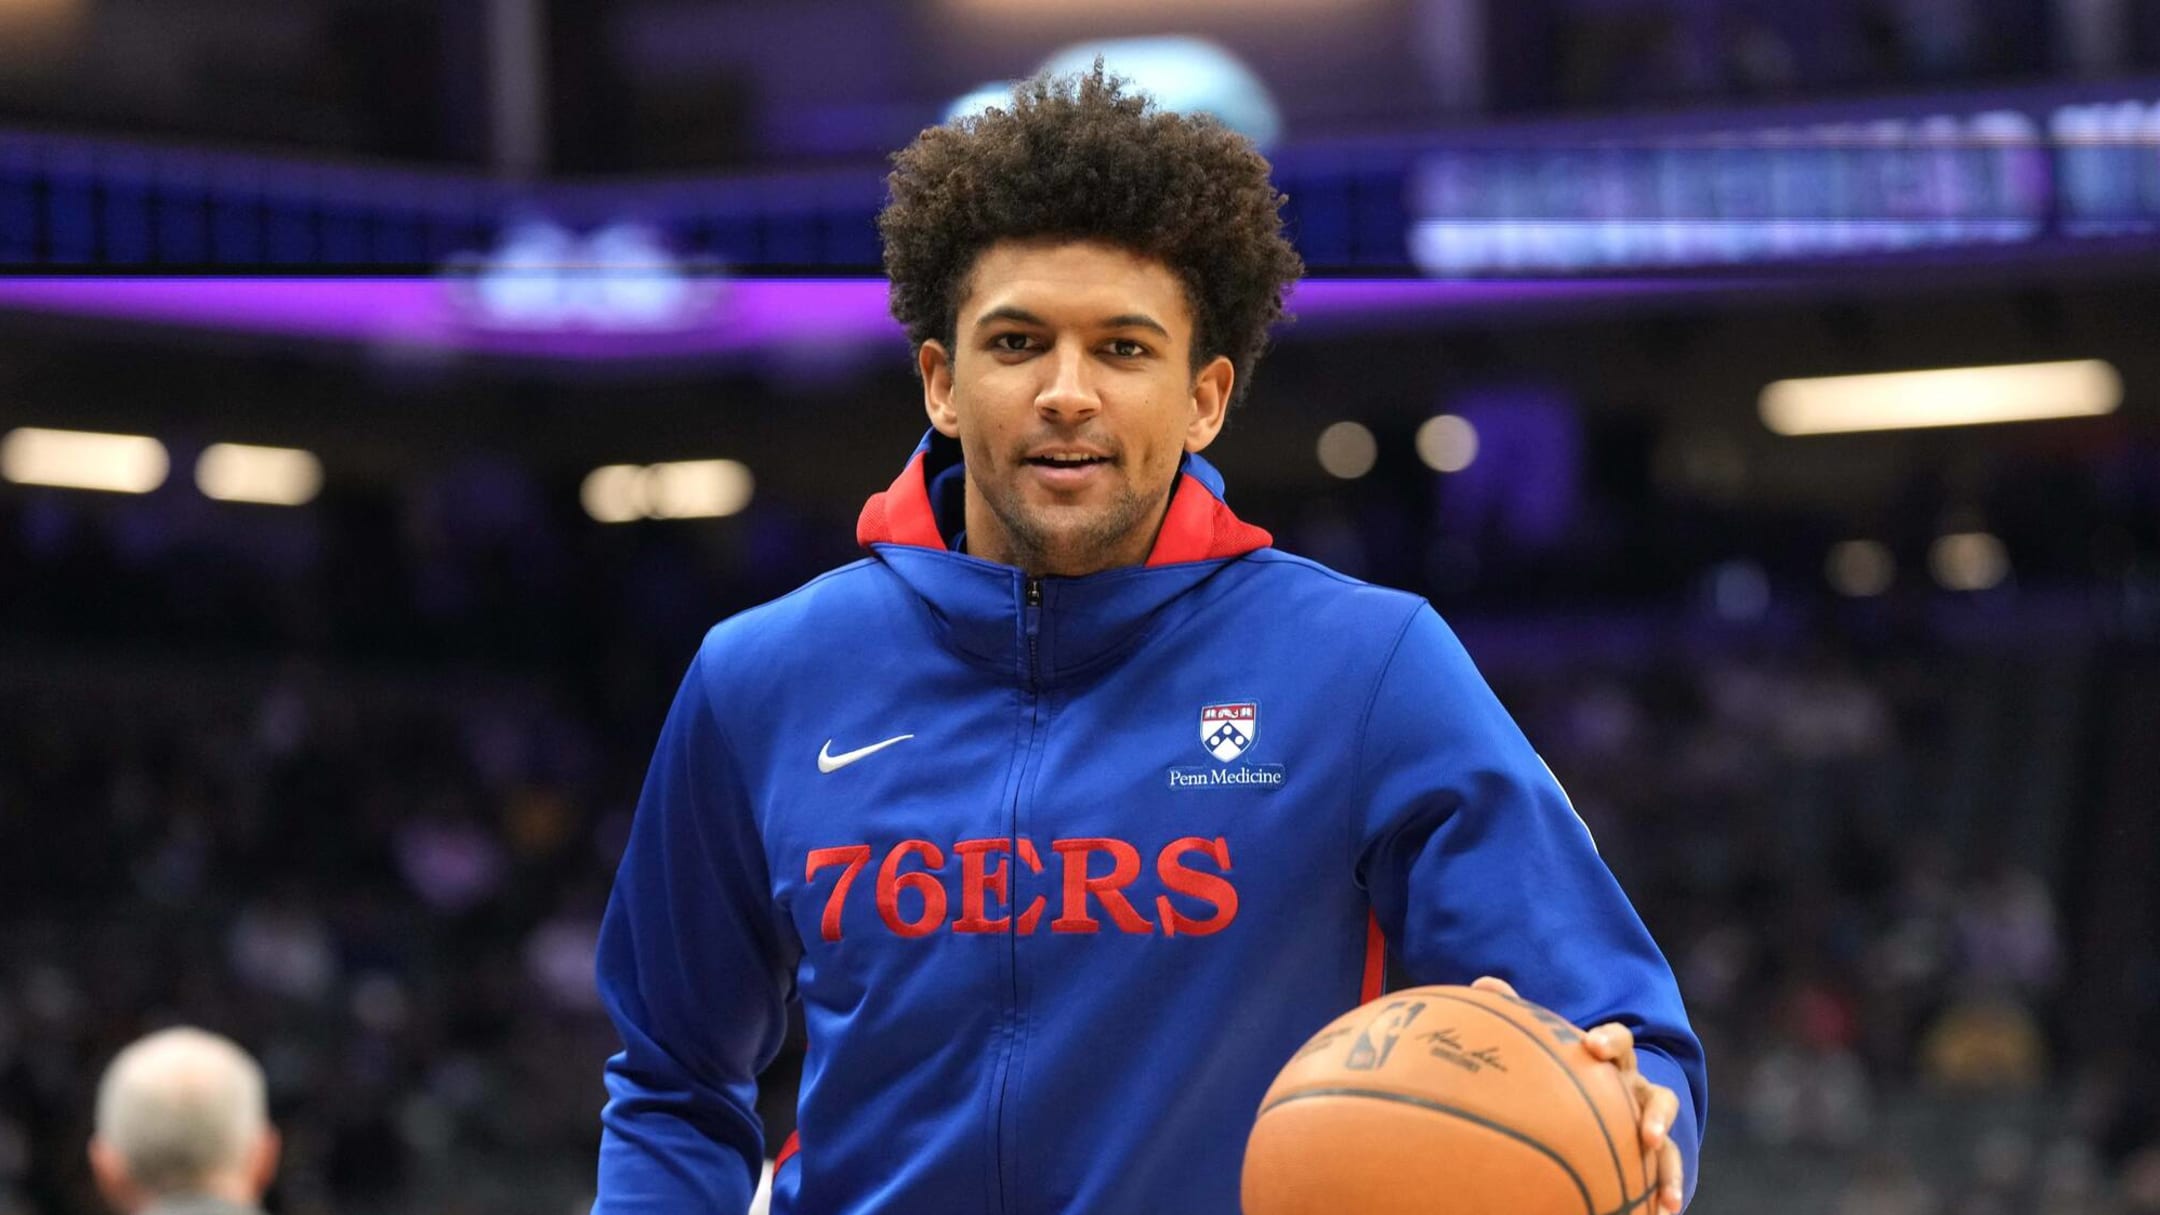 A lockdown defender, Matisse Thybulle wants ultimately to be remembered as  someone who expanded his game